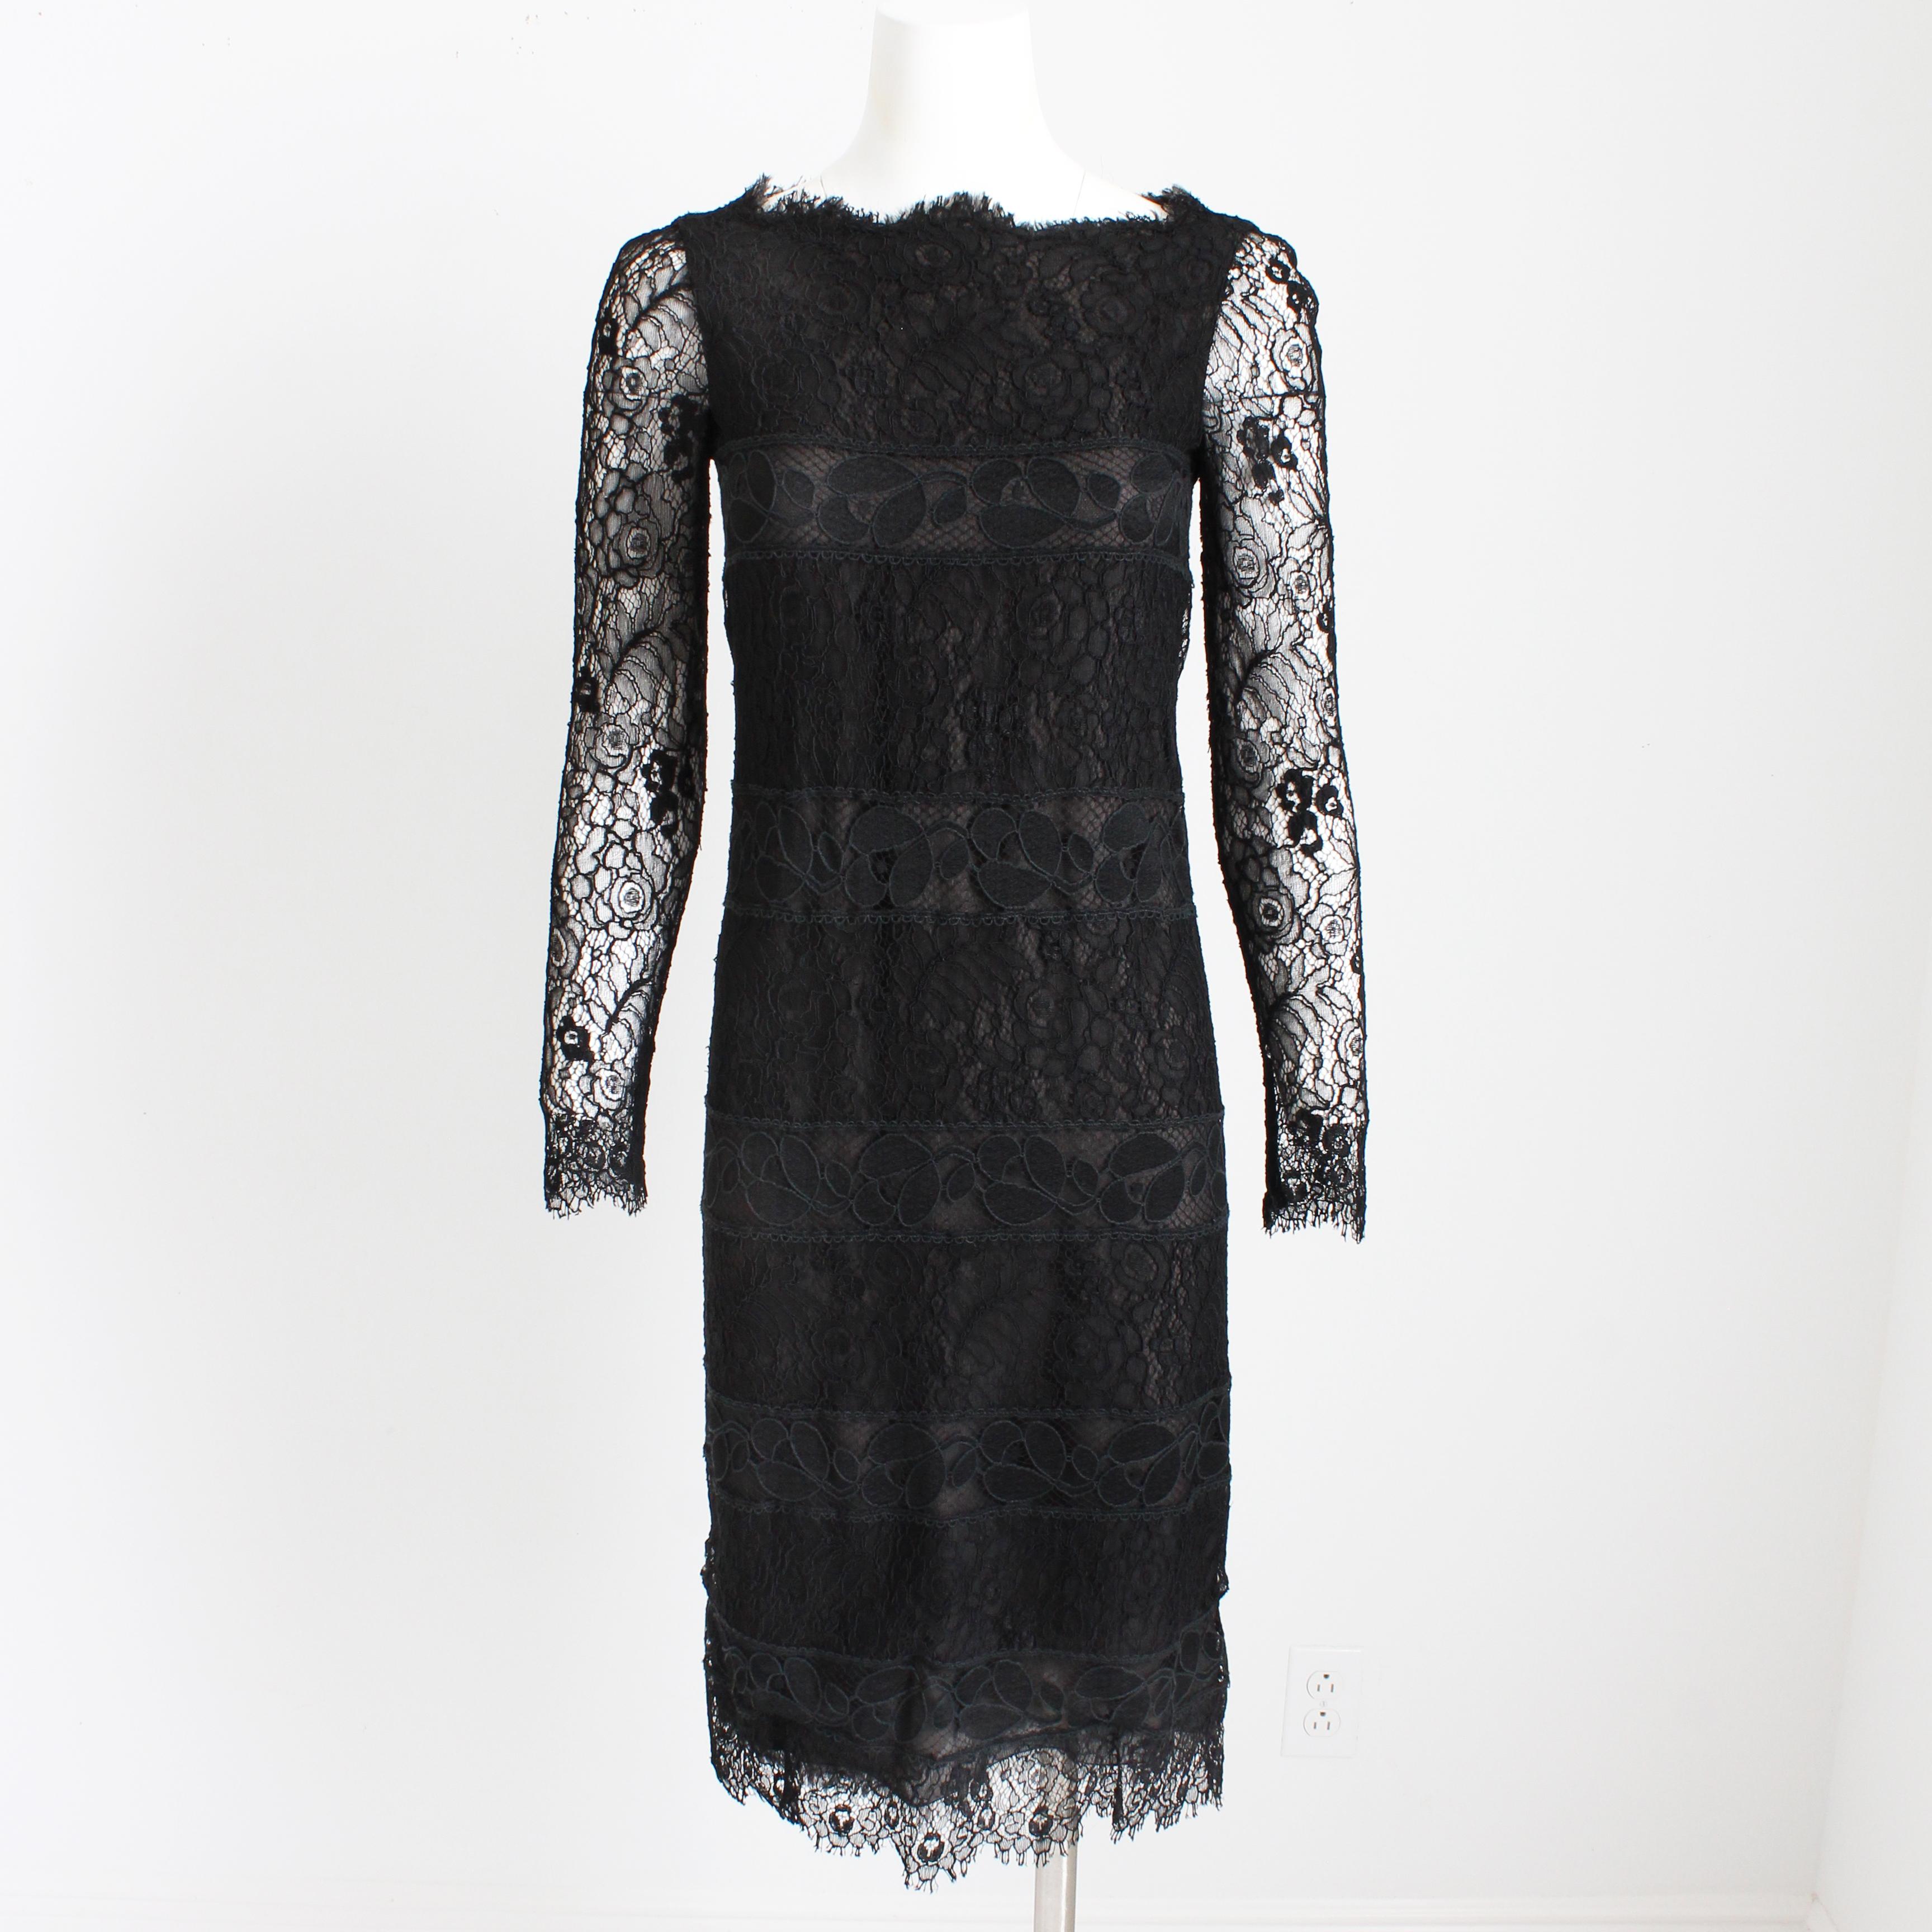 Preowned, vintage Chanel couture cocktail dress, likely made in the early 80s.  Made from silk and linen floral guipure lace over a black silk underdress, it features a scalloped neckline and hem, and fastens with a metal zipper in back.  The